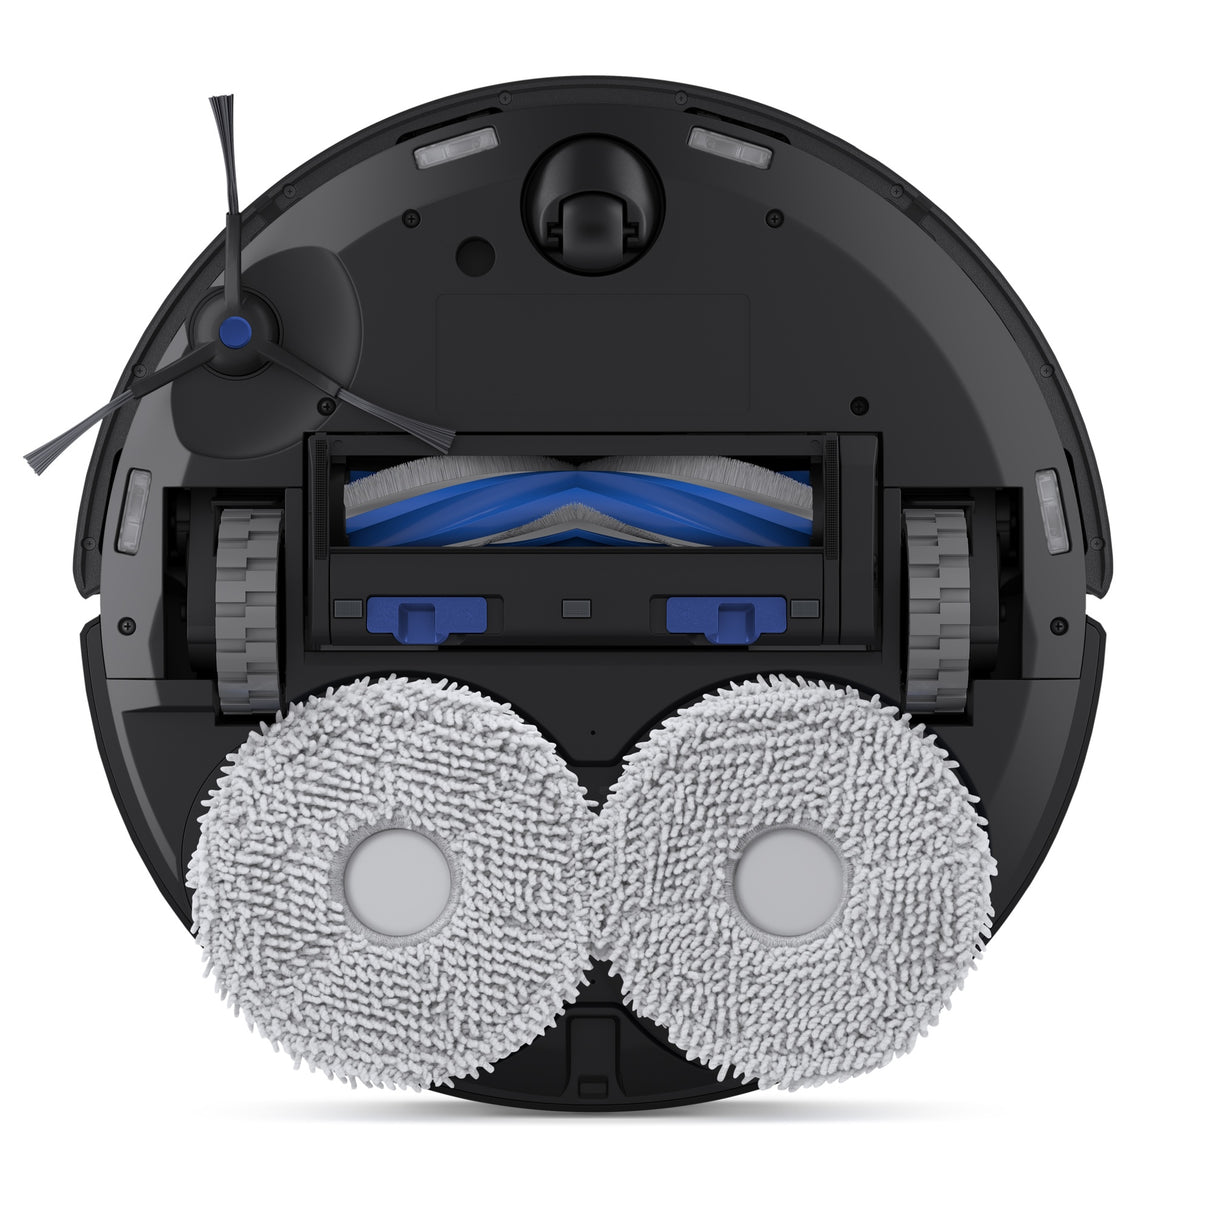 DEEBOT T30 OMNI Mopping Kit - 4 Rotating Mopping Pads